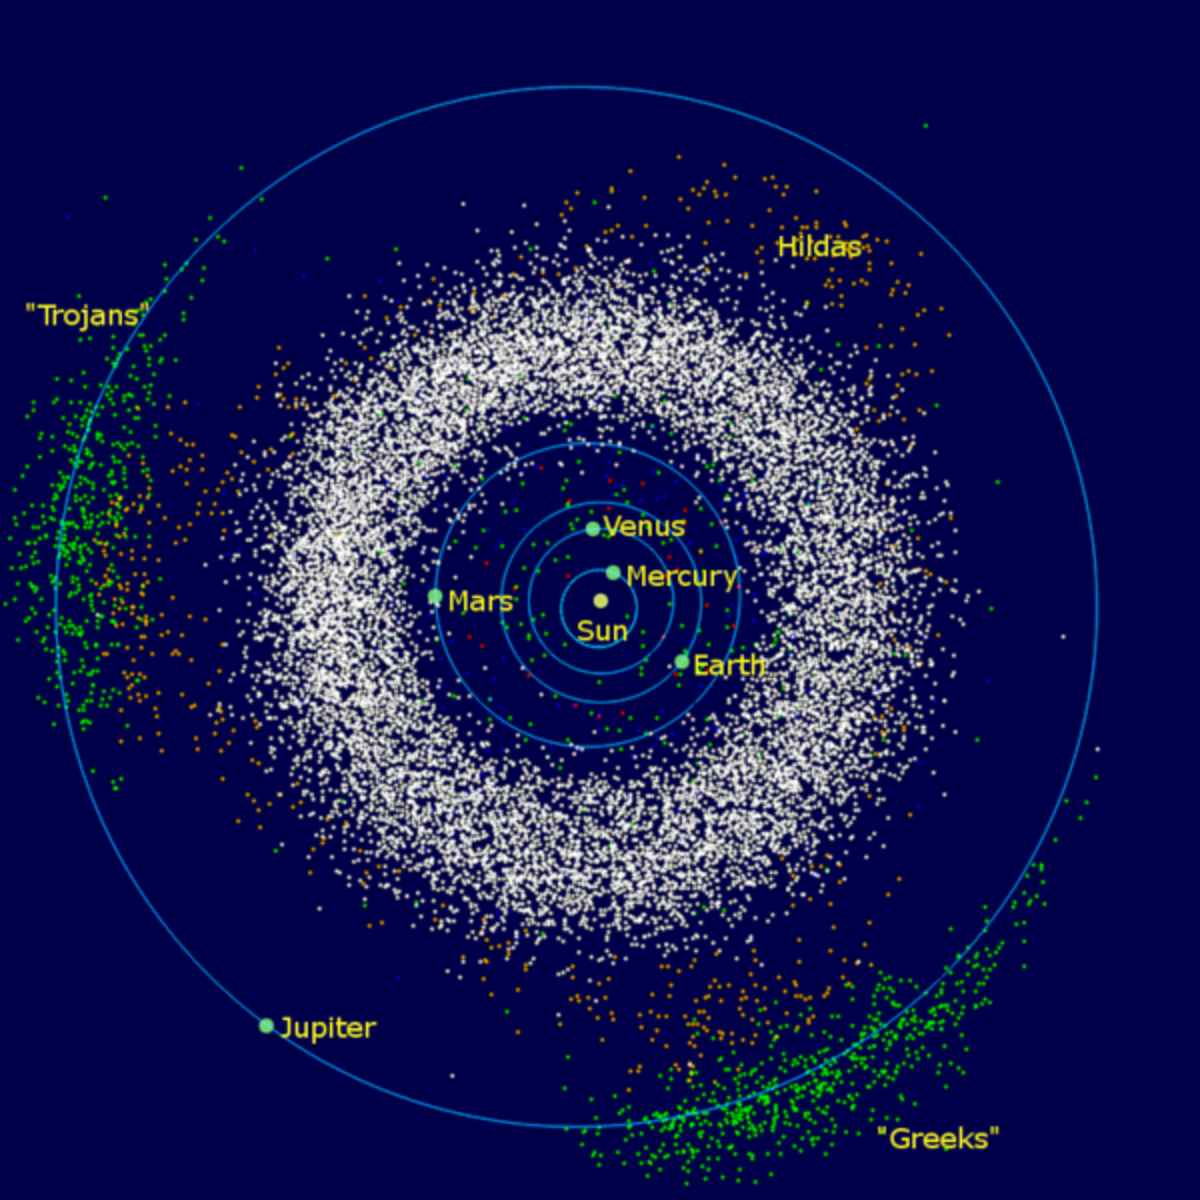 Asteroids of the inner Solar System